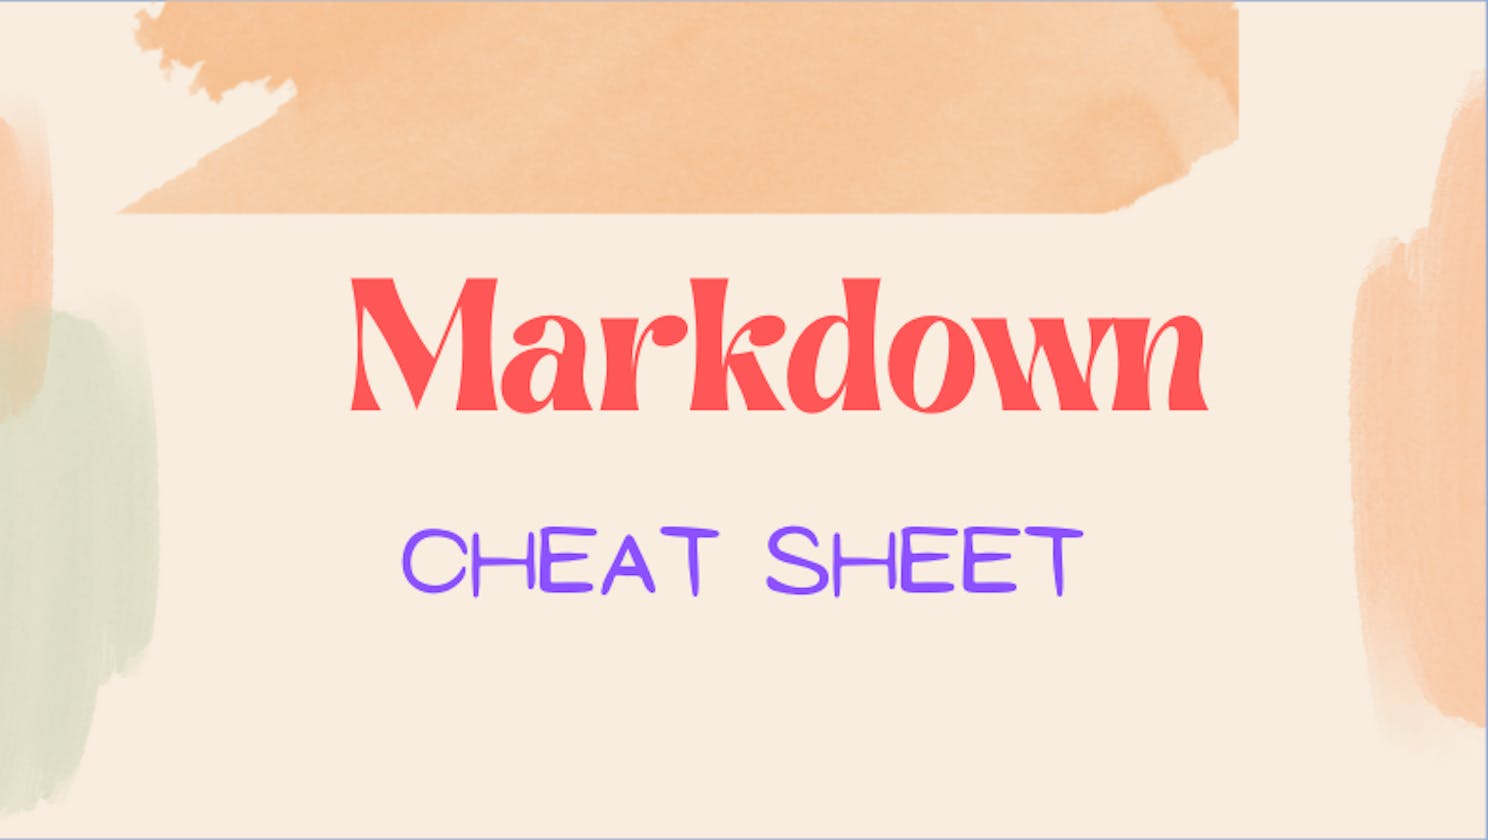 What is Markdown in detail.